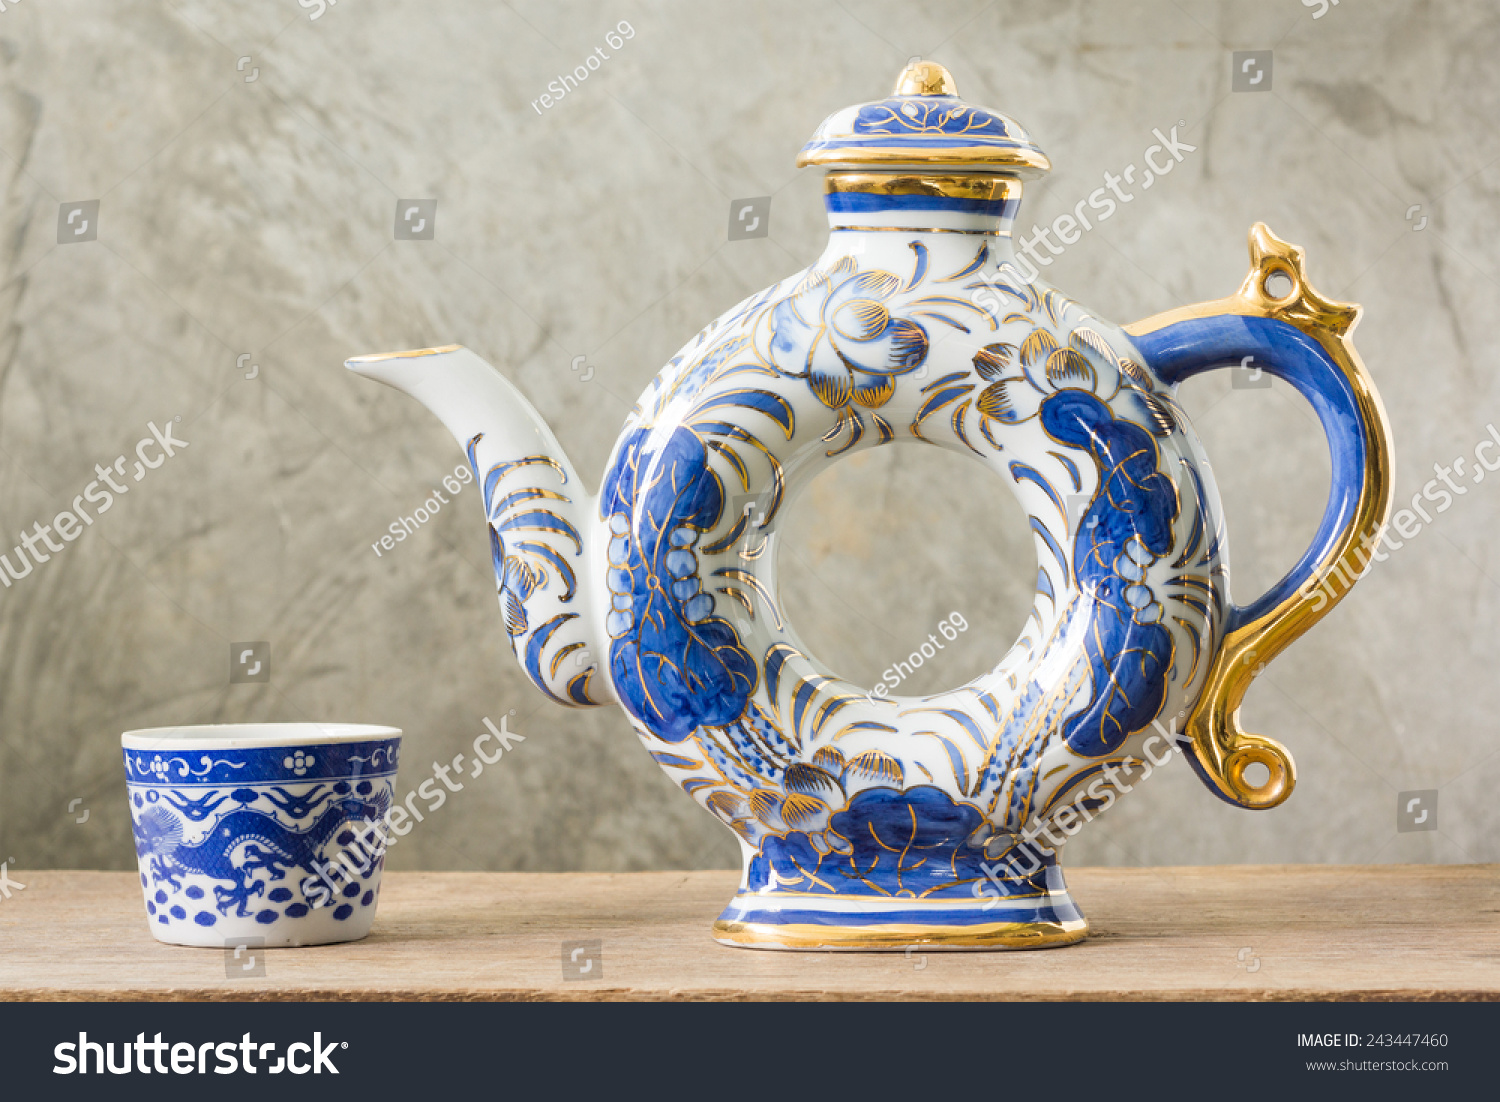 Blue and white Asian teapot with teacup